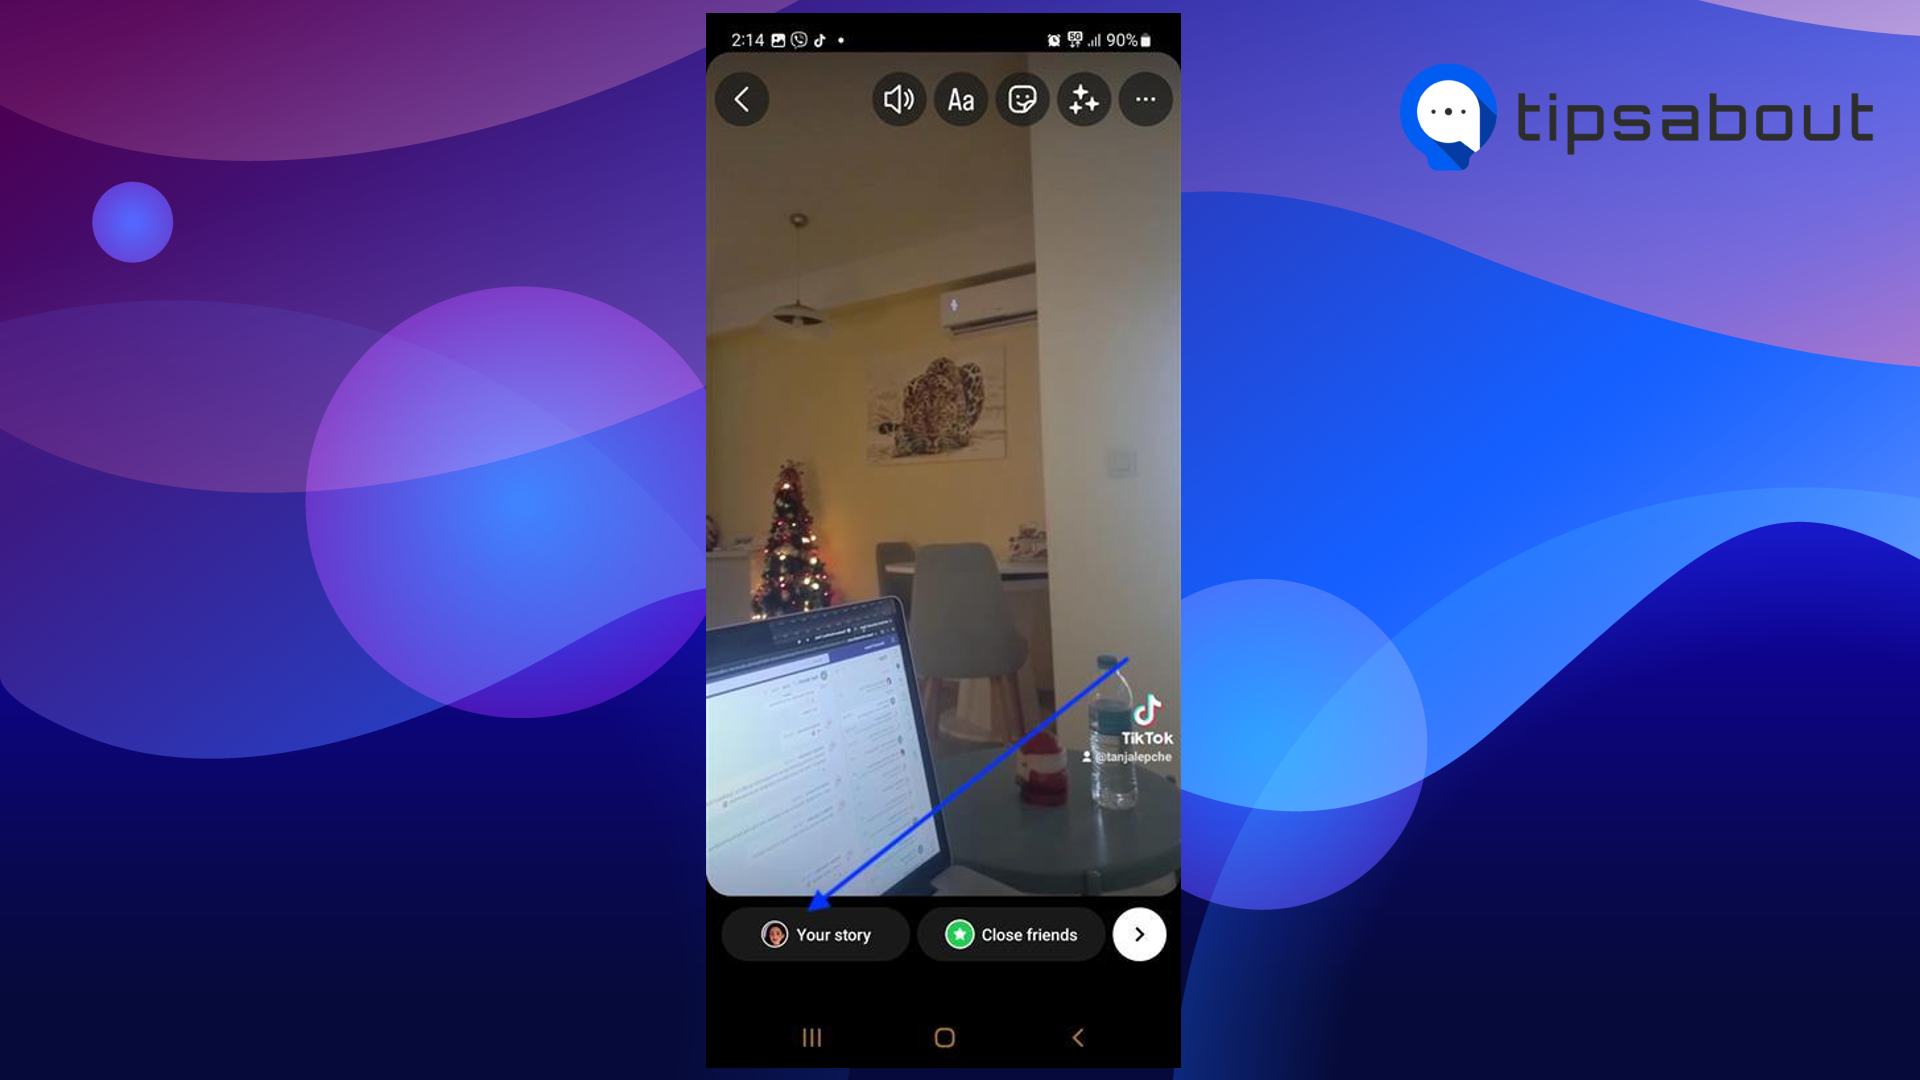 Share TikTok video on IG story by tapping on Your Story